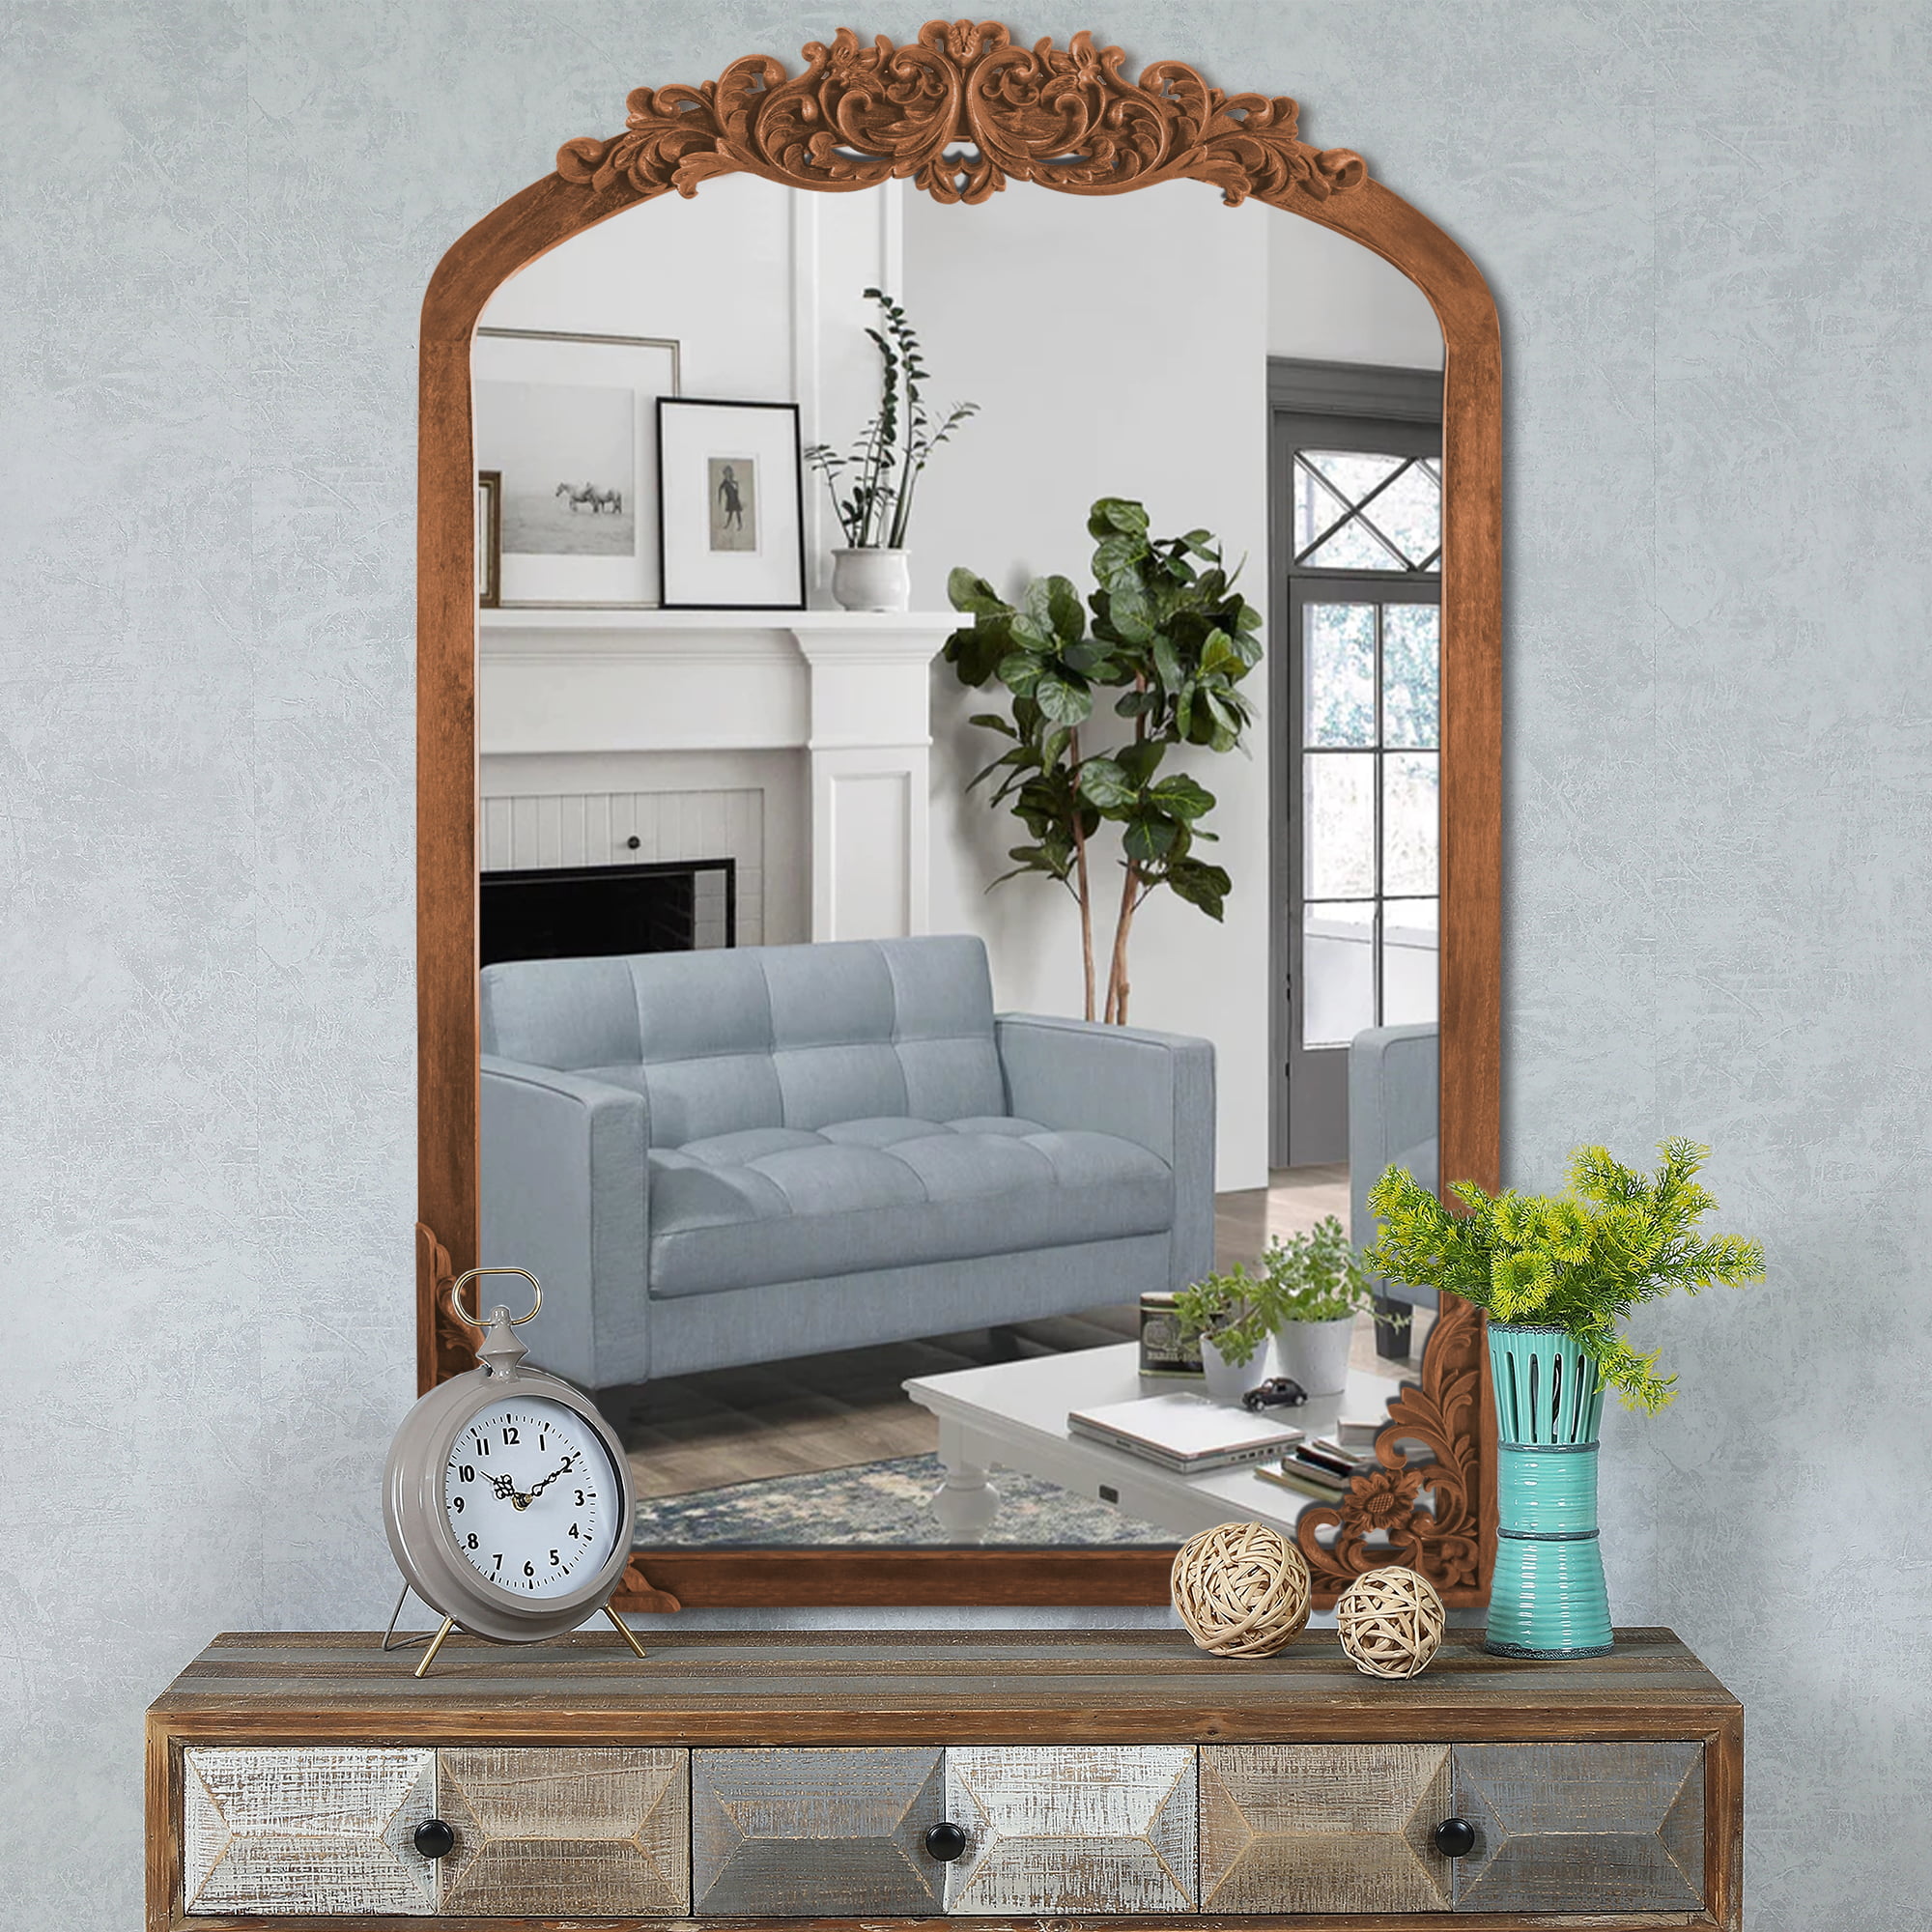 Buy Glass Wood Vintage Mirror For Home Decor And Living Space Online - Ikiru